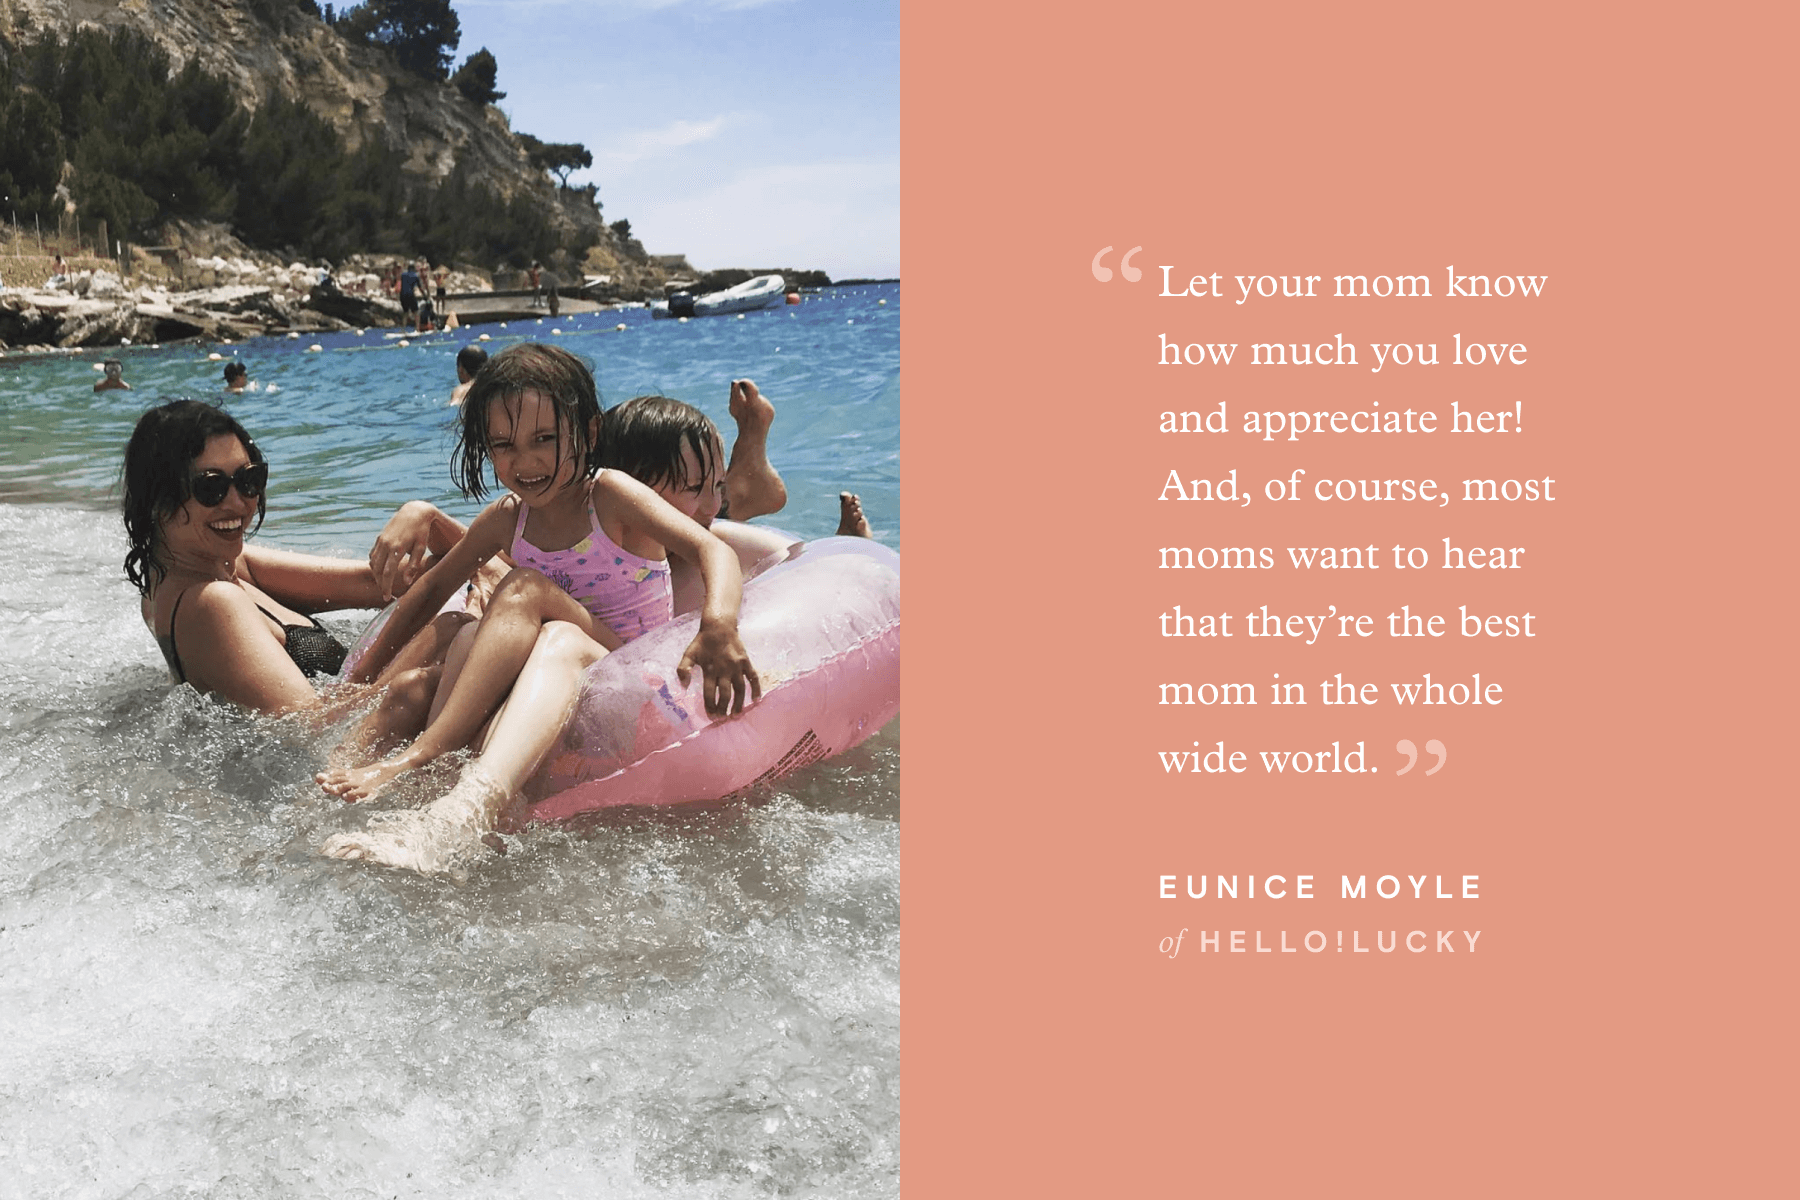 A photo of Eunice Moyle with her kids and a pull quote that reads “Let your mom know how much you love and appreciate her! And, of course, most moms want to hear that they’re the best mom in the whole wide world.”